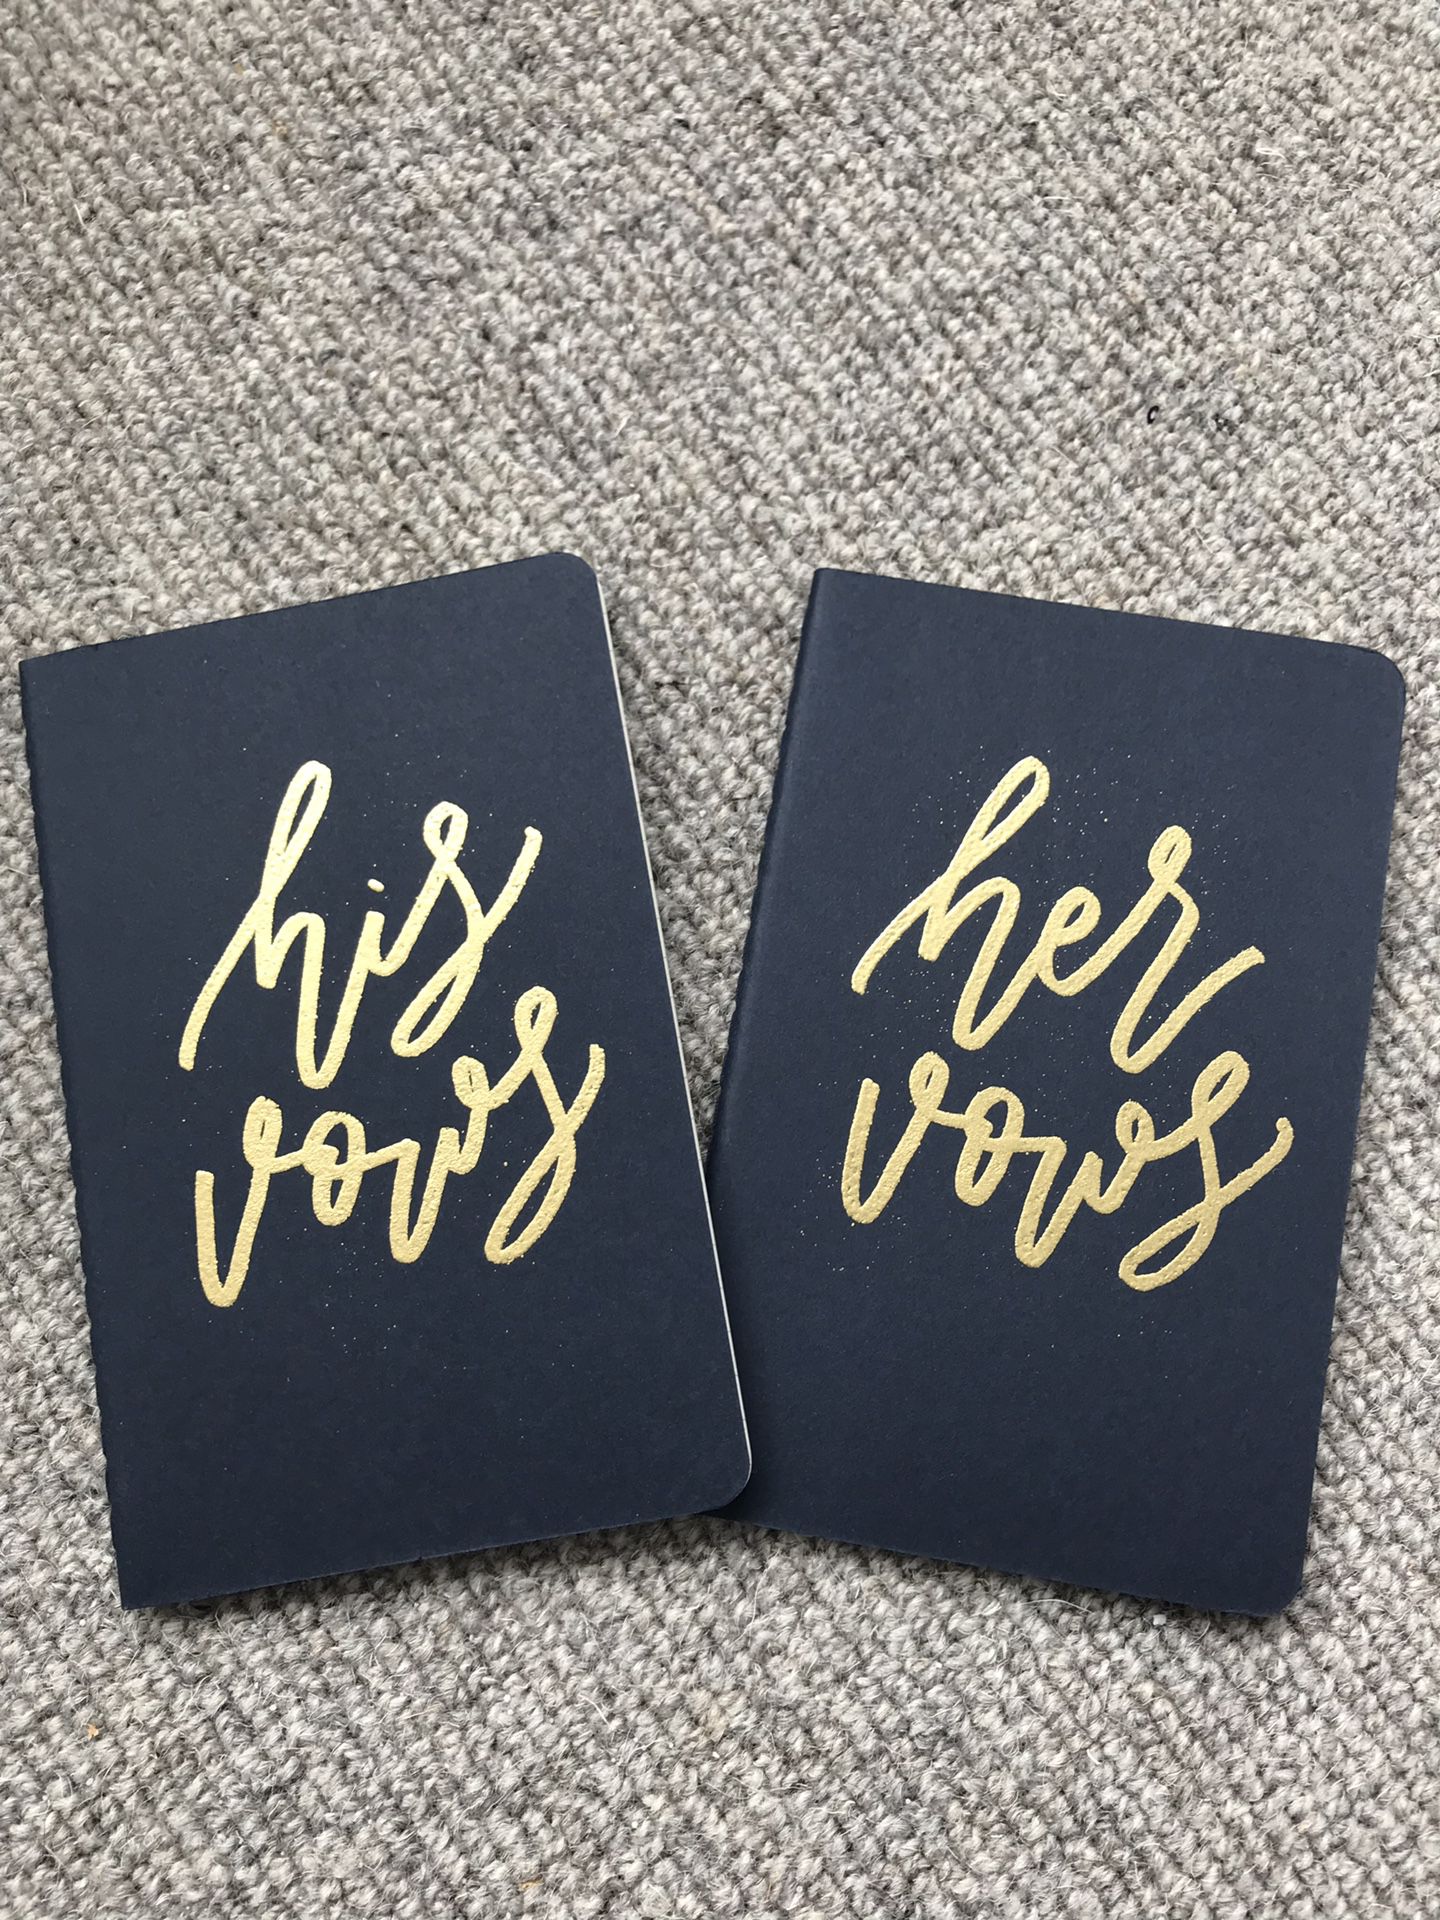 His and hers wedding vows books navy blue and gold